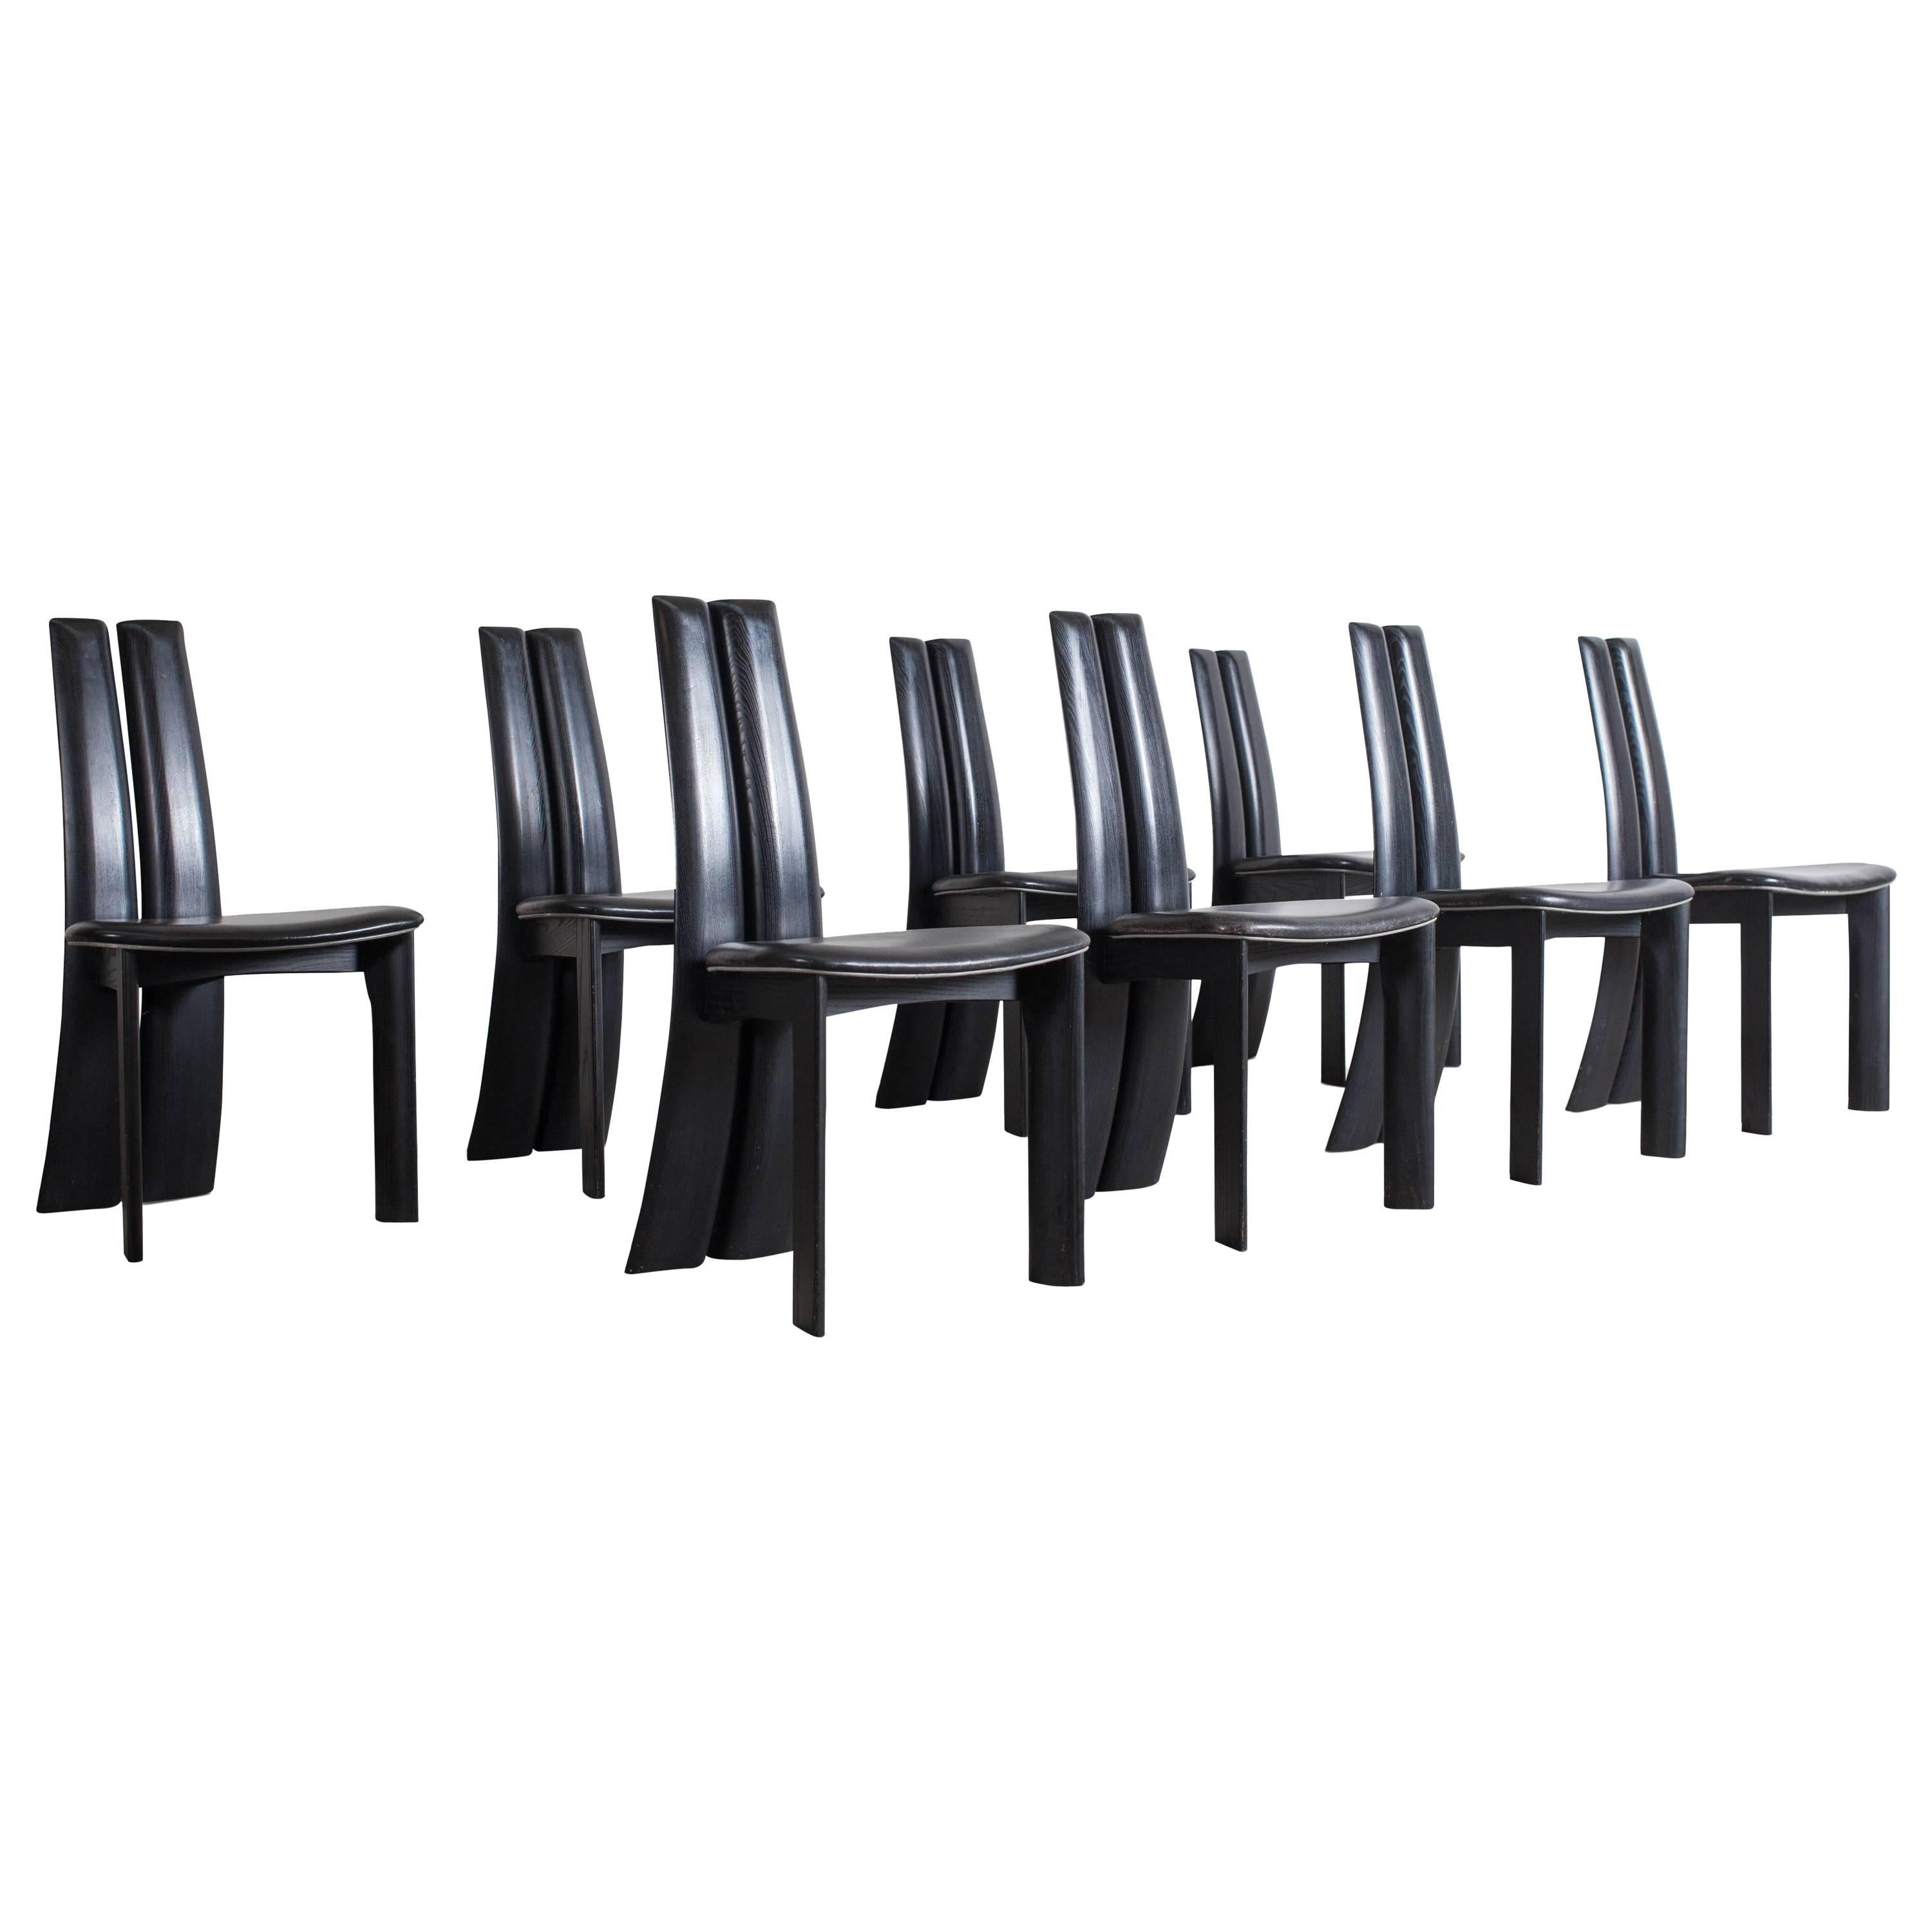 Mid-century modern sculptural ebonized dining chairs, set of eight